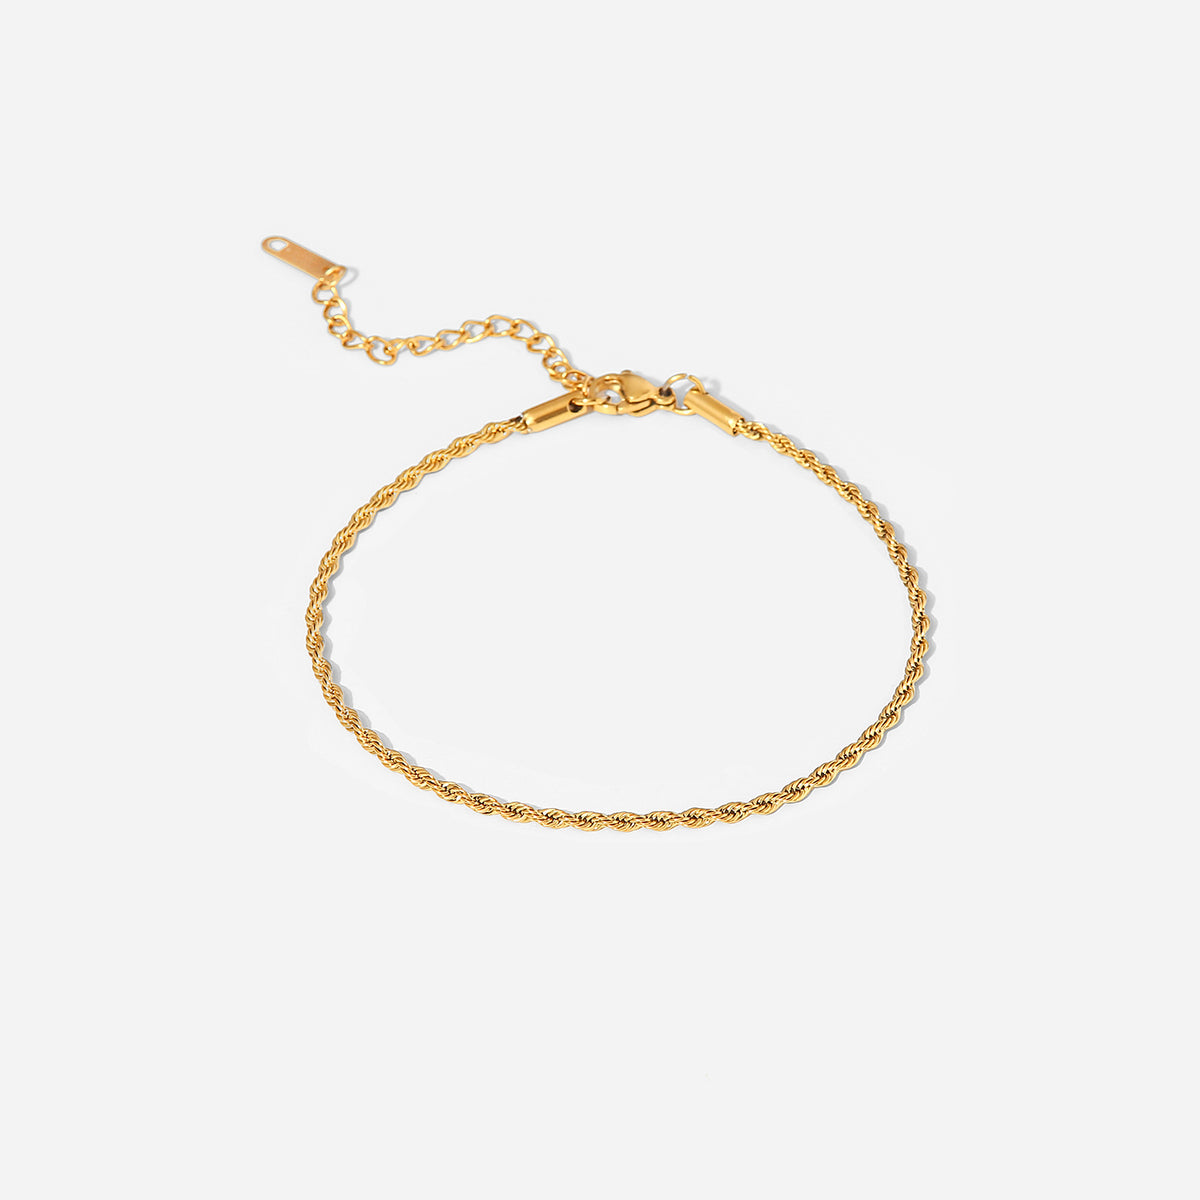 Shia Chain Anklet by Ranee London | Tarnish Free 18k Gold Plated ...